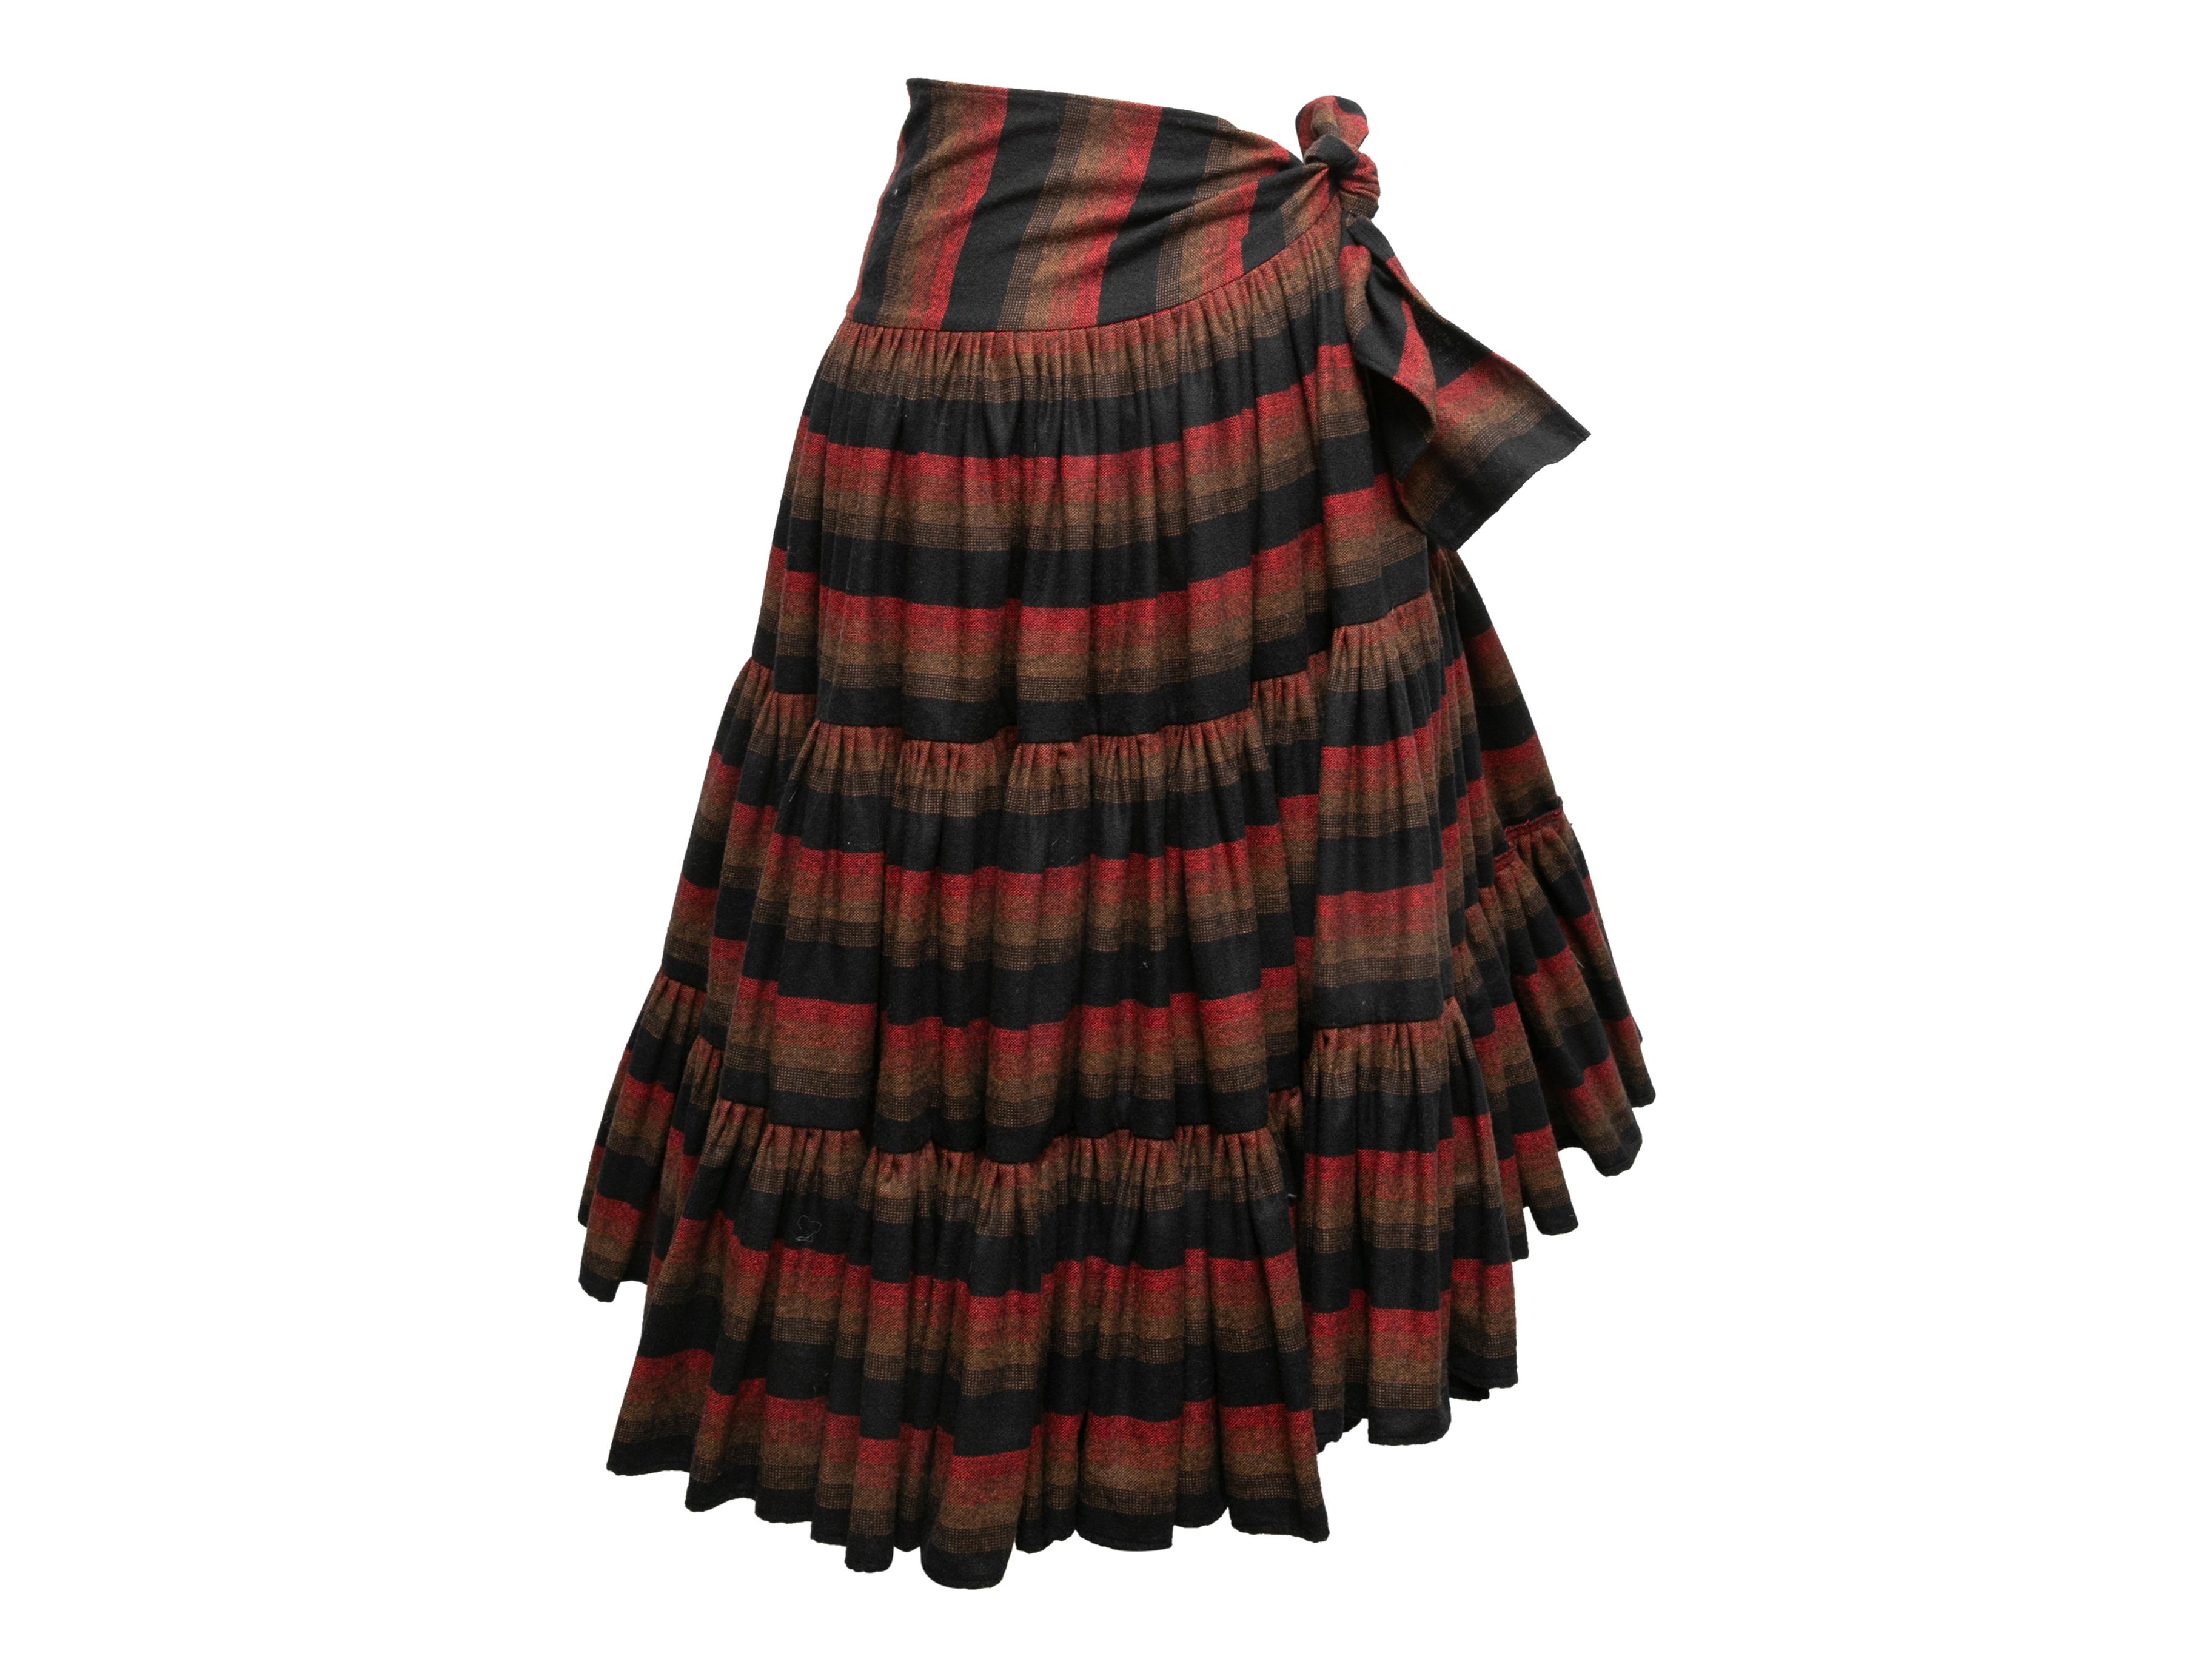 Vintage black and multicolor striped wool wrap skirt by Norma Kamali. Circa 1970s. Tie closure at hip. 26